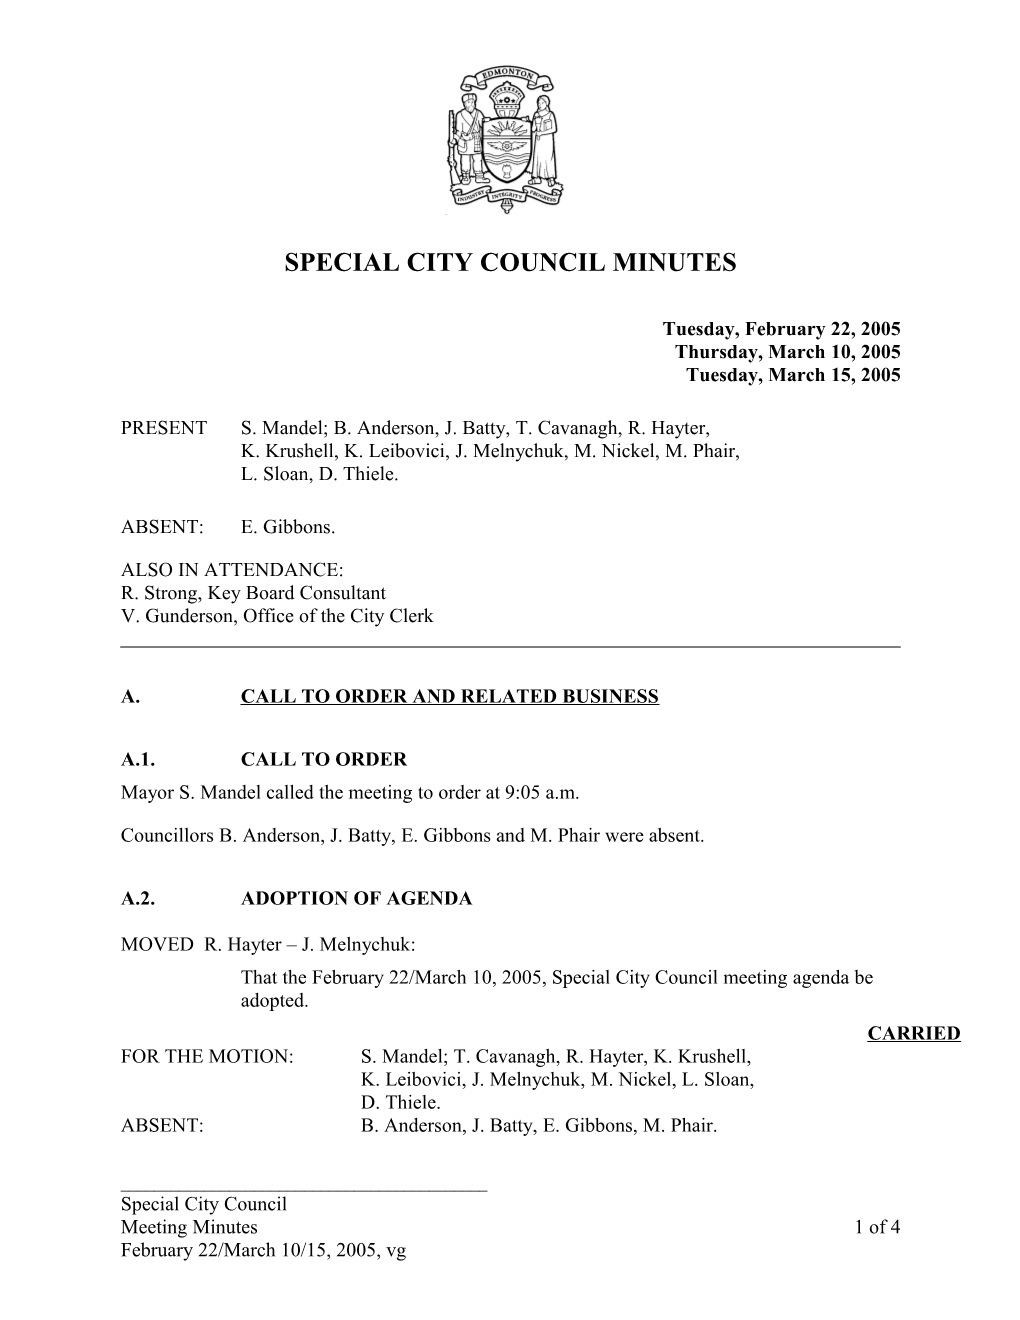 Minutes for City Council February 22, 2005 Meeting